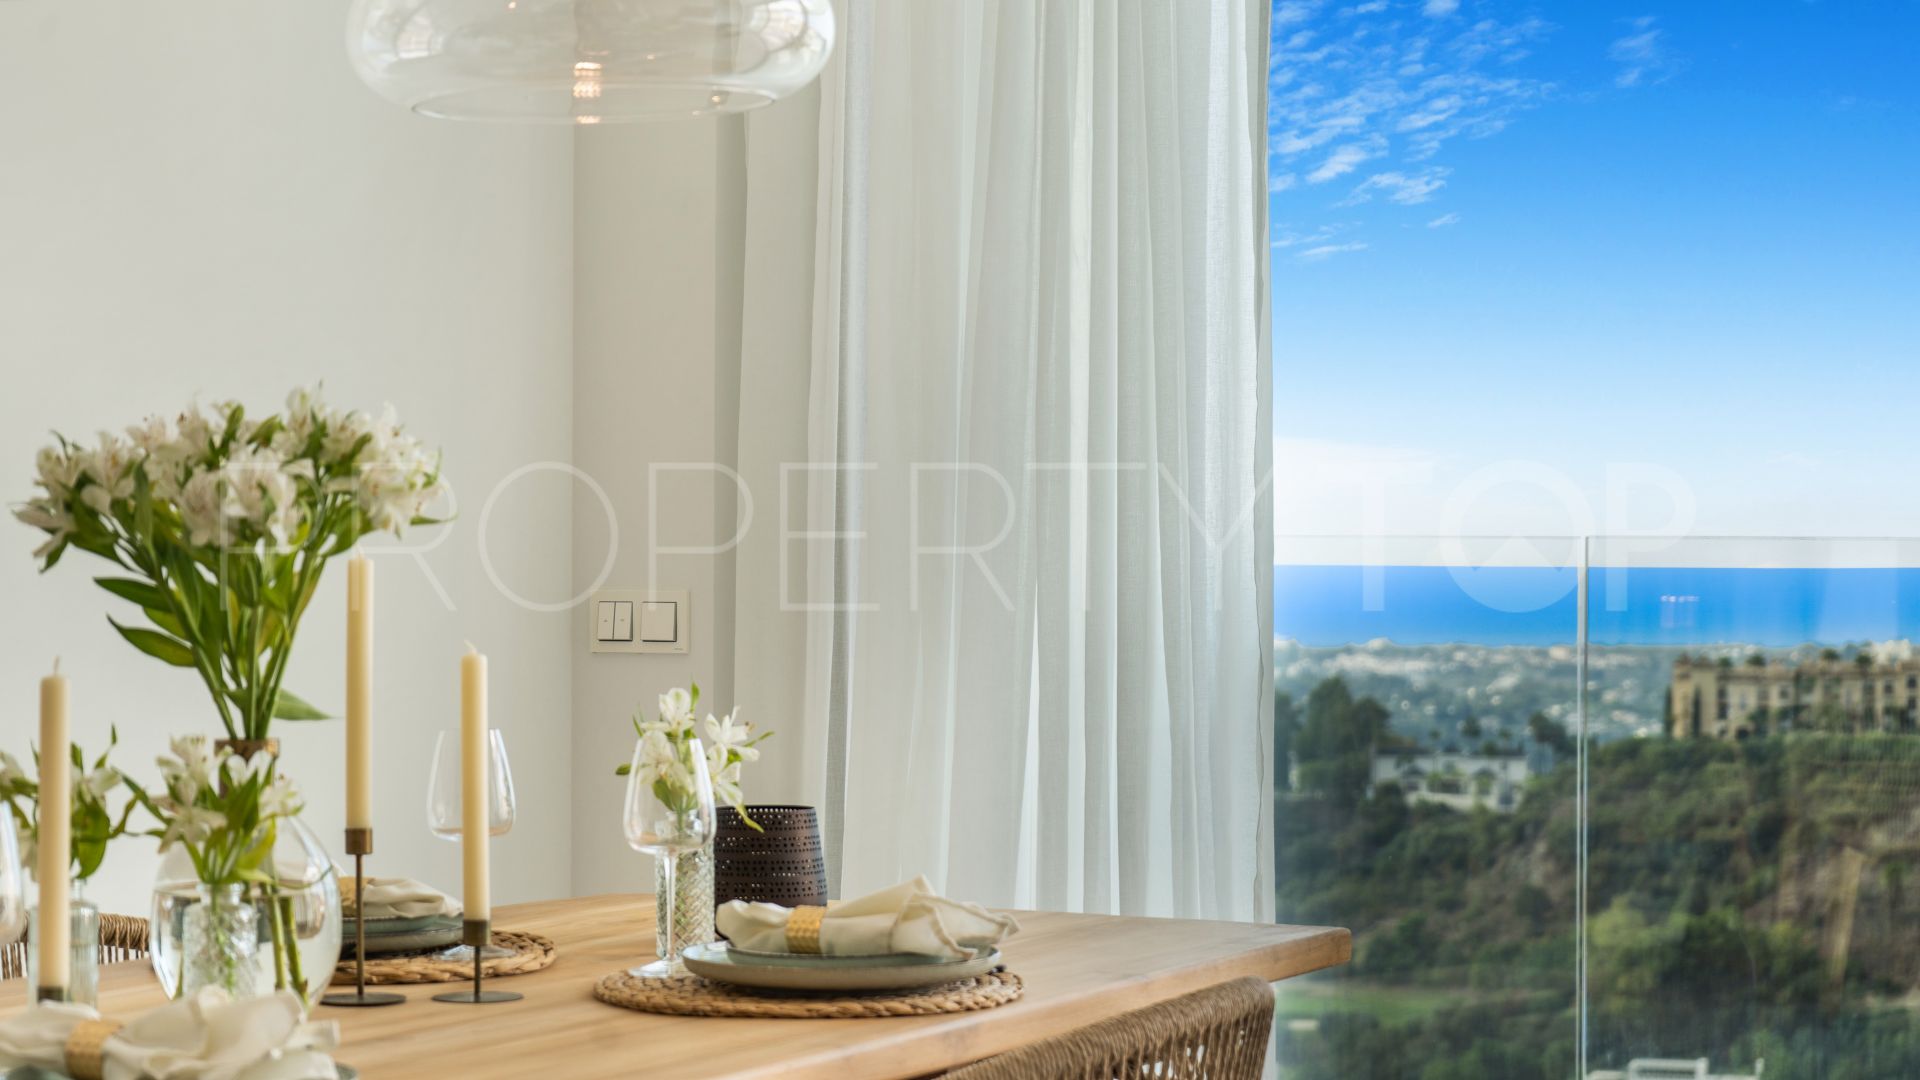 The View Marbella 2 bedrooms penthouse for sale